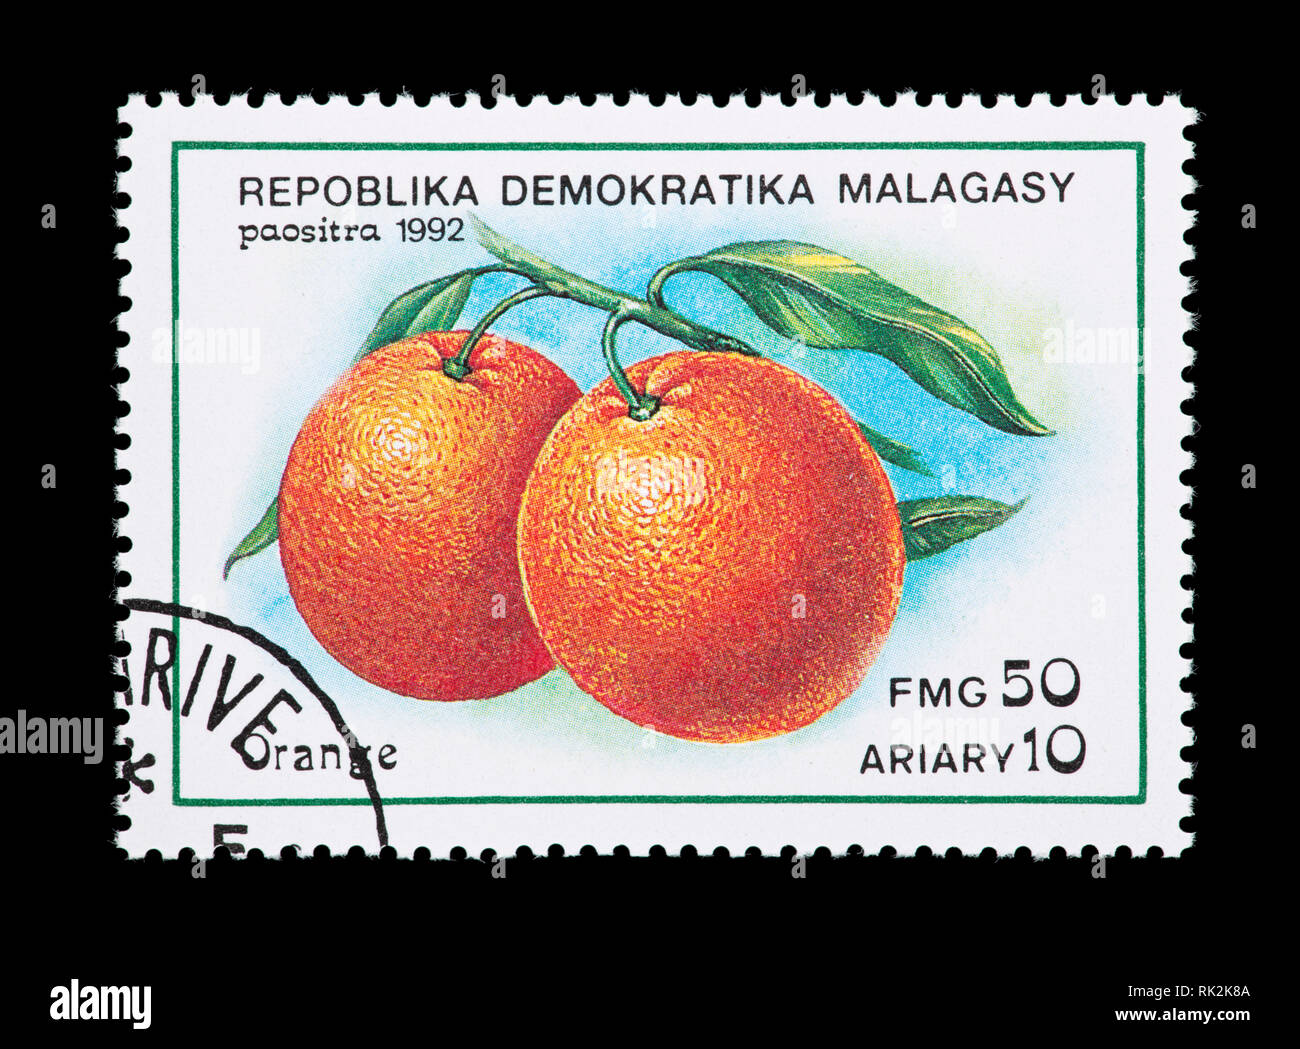 Postage stamp from Madagascar depicting two oranges on a branch. Stock Photo